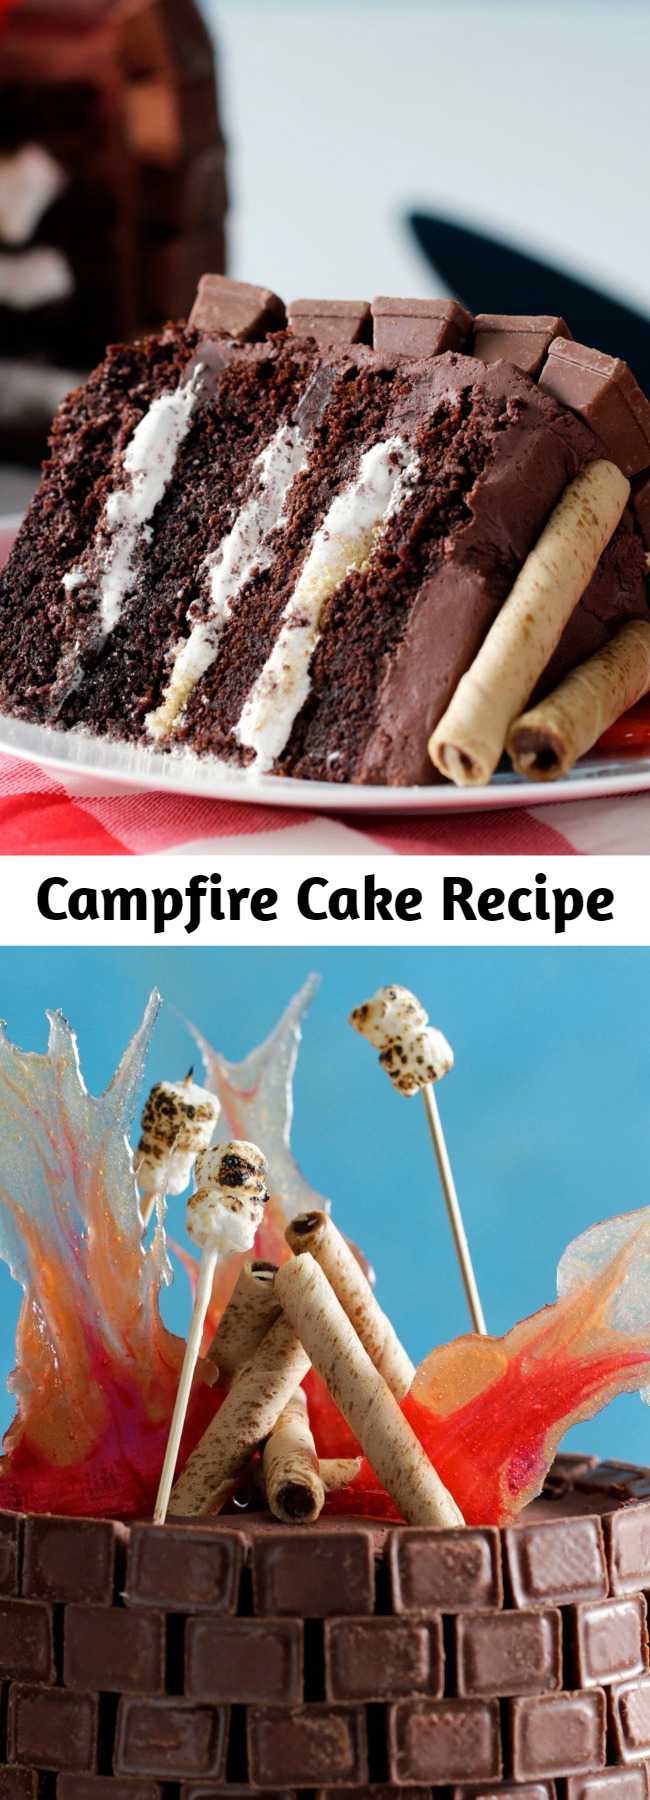 Campfire Cake Recipe - Here's the perfect birthday cake idea for a backyard party or camping party or for those outdoorsy types. This Campfire Cake recipe is sure to light up the birthday camper as well as the other party guests.